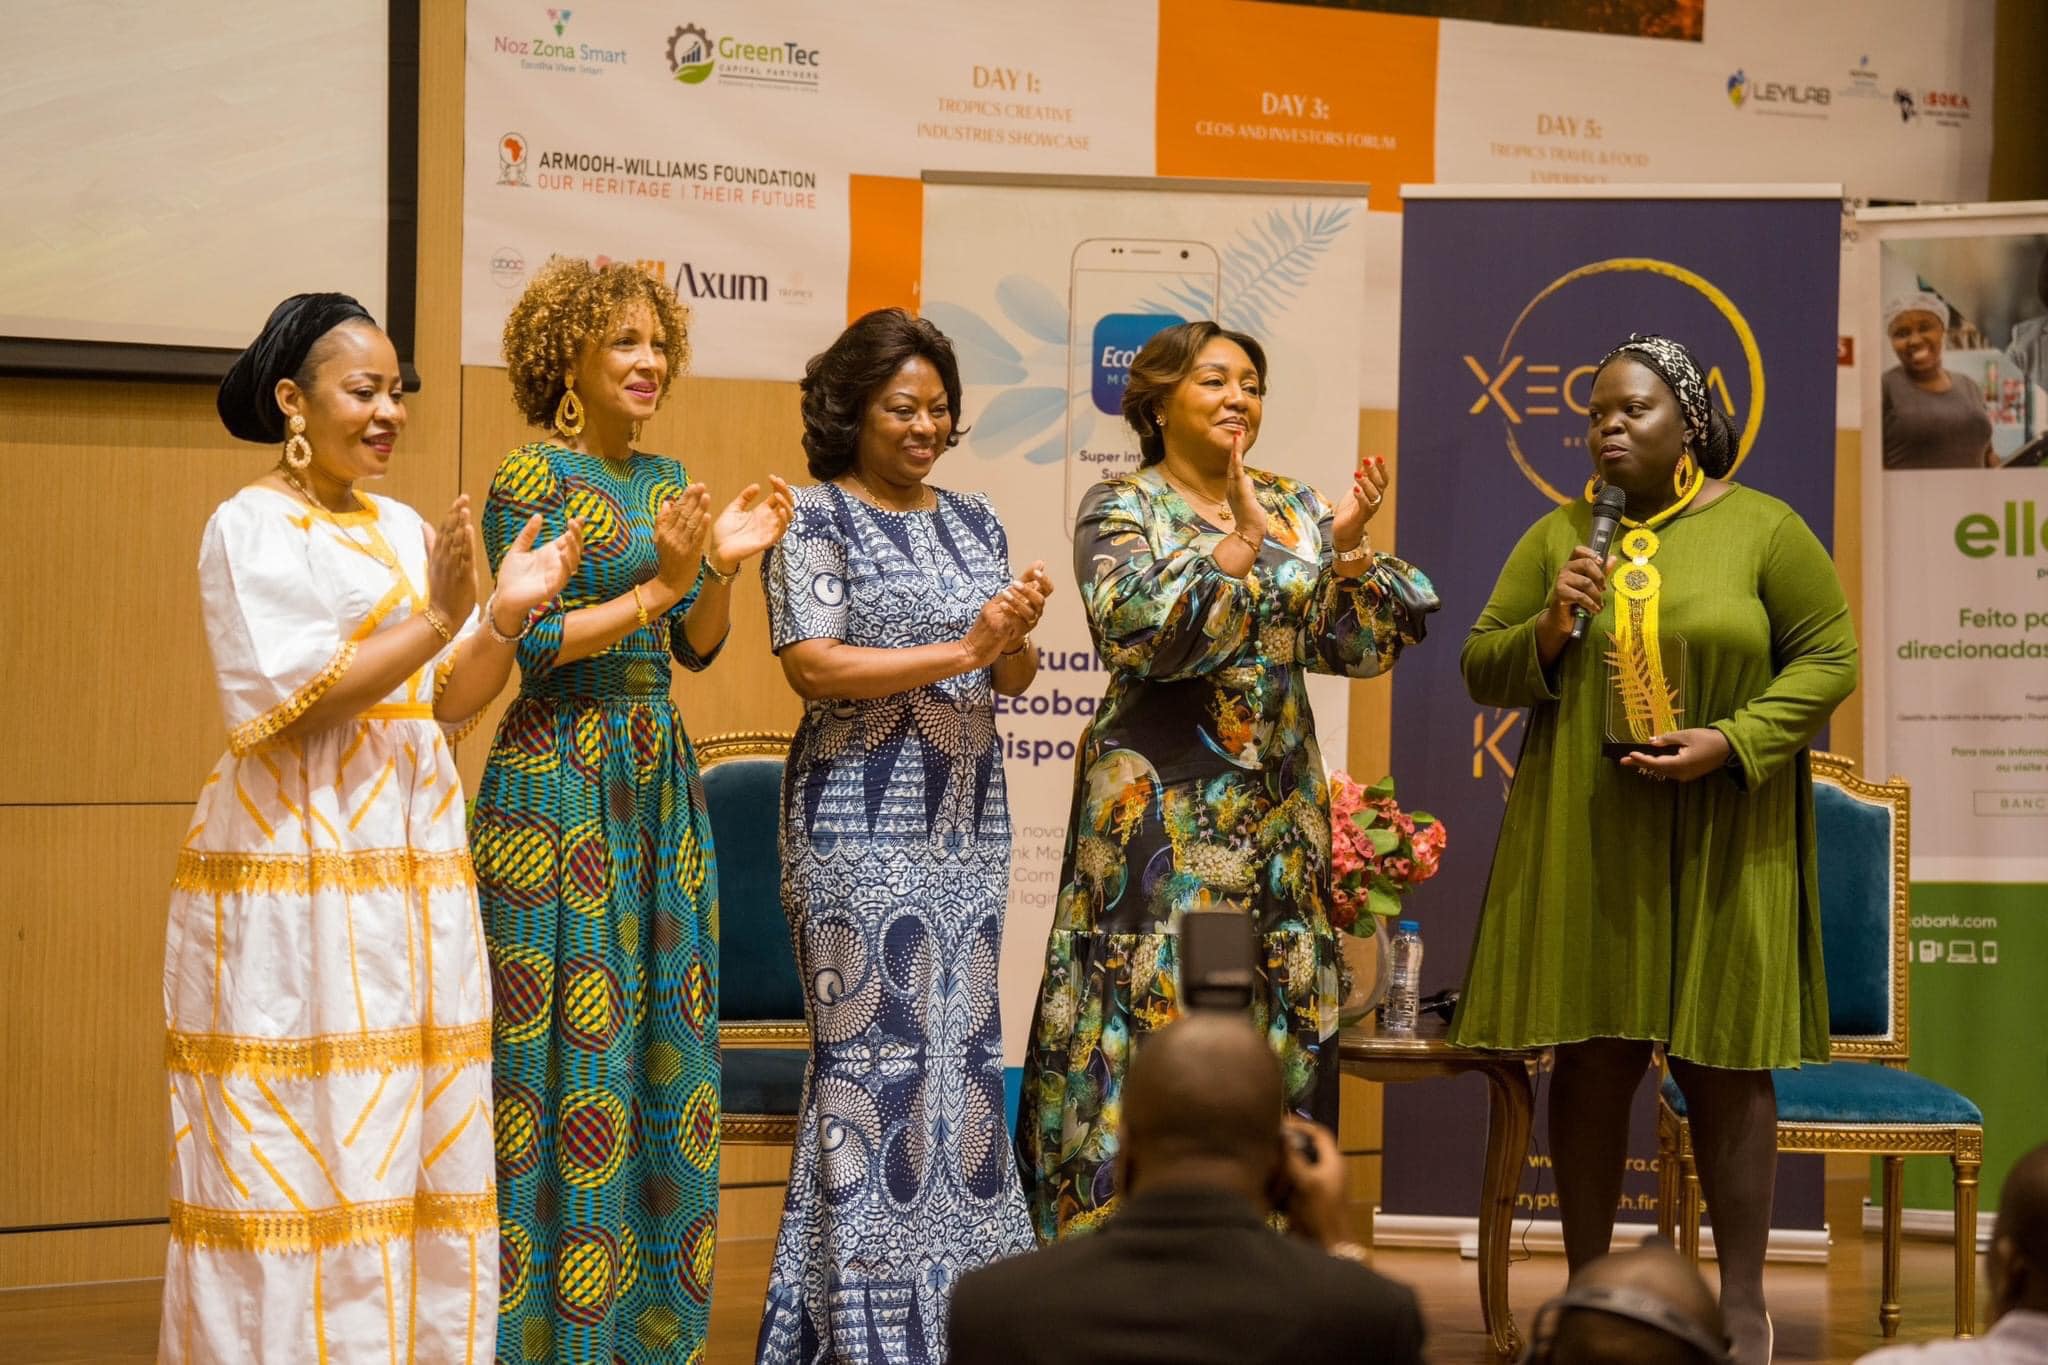 Venicia Guinot, President of the Tropics Group with the First Ladies of Cape Verde, the Democratic Republic of Congo, Angola and the representative of the First Lady of Equatorial Guinea. (Photo by Kidjo Photography)